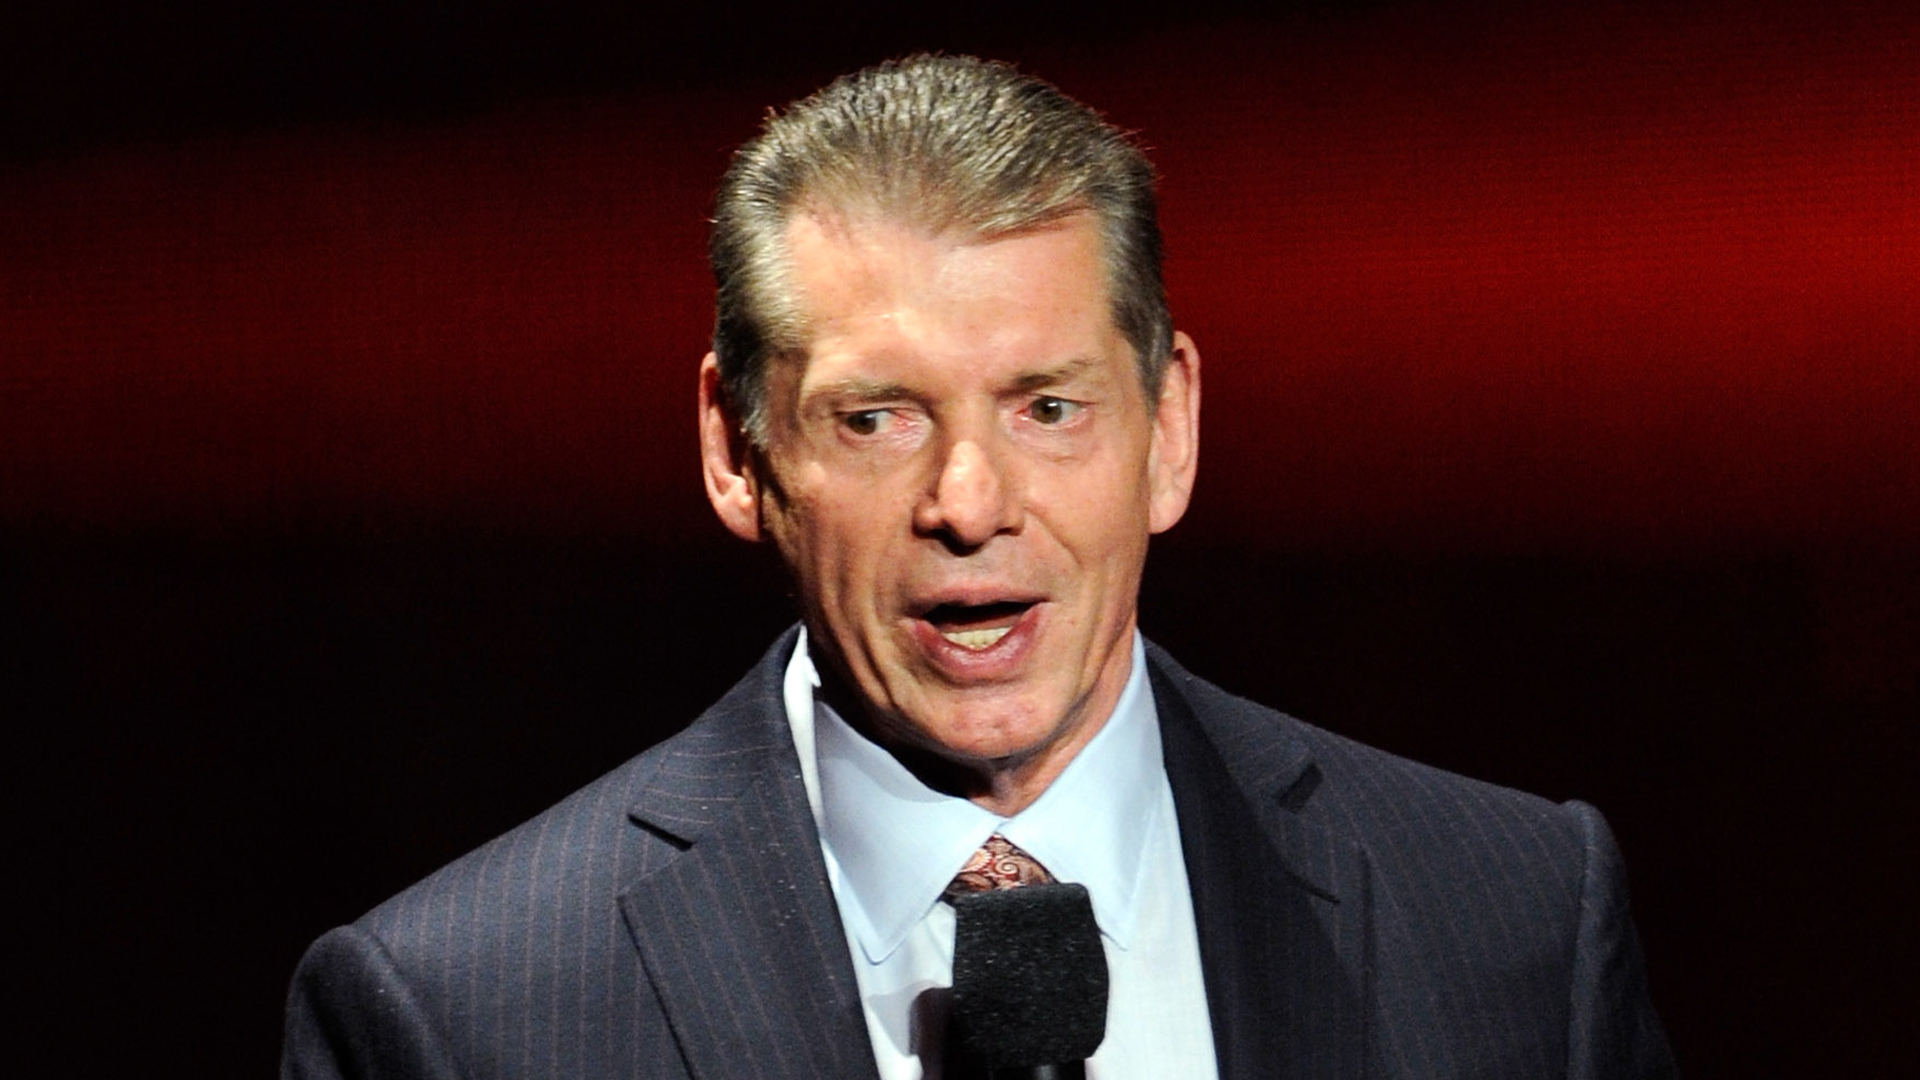 *BREAKING* Vince McMahon Under Federal Investigation For Sex Trafficking Allegations